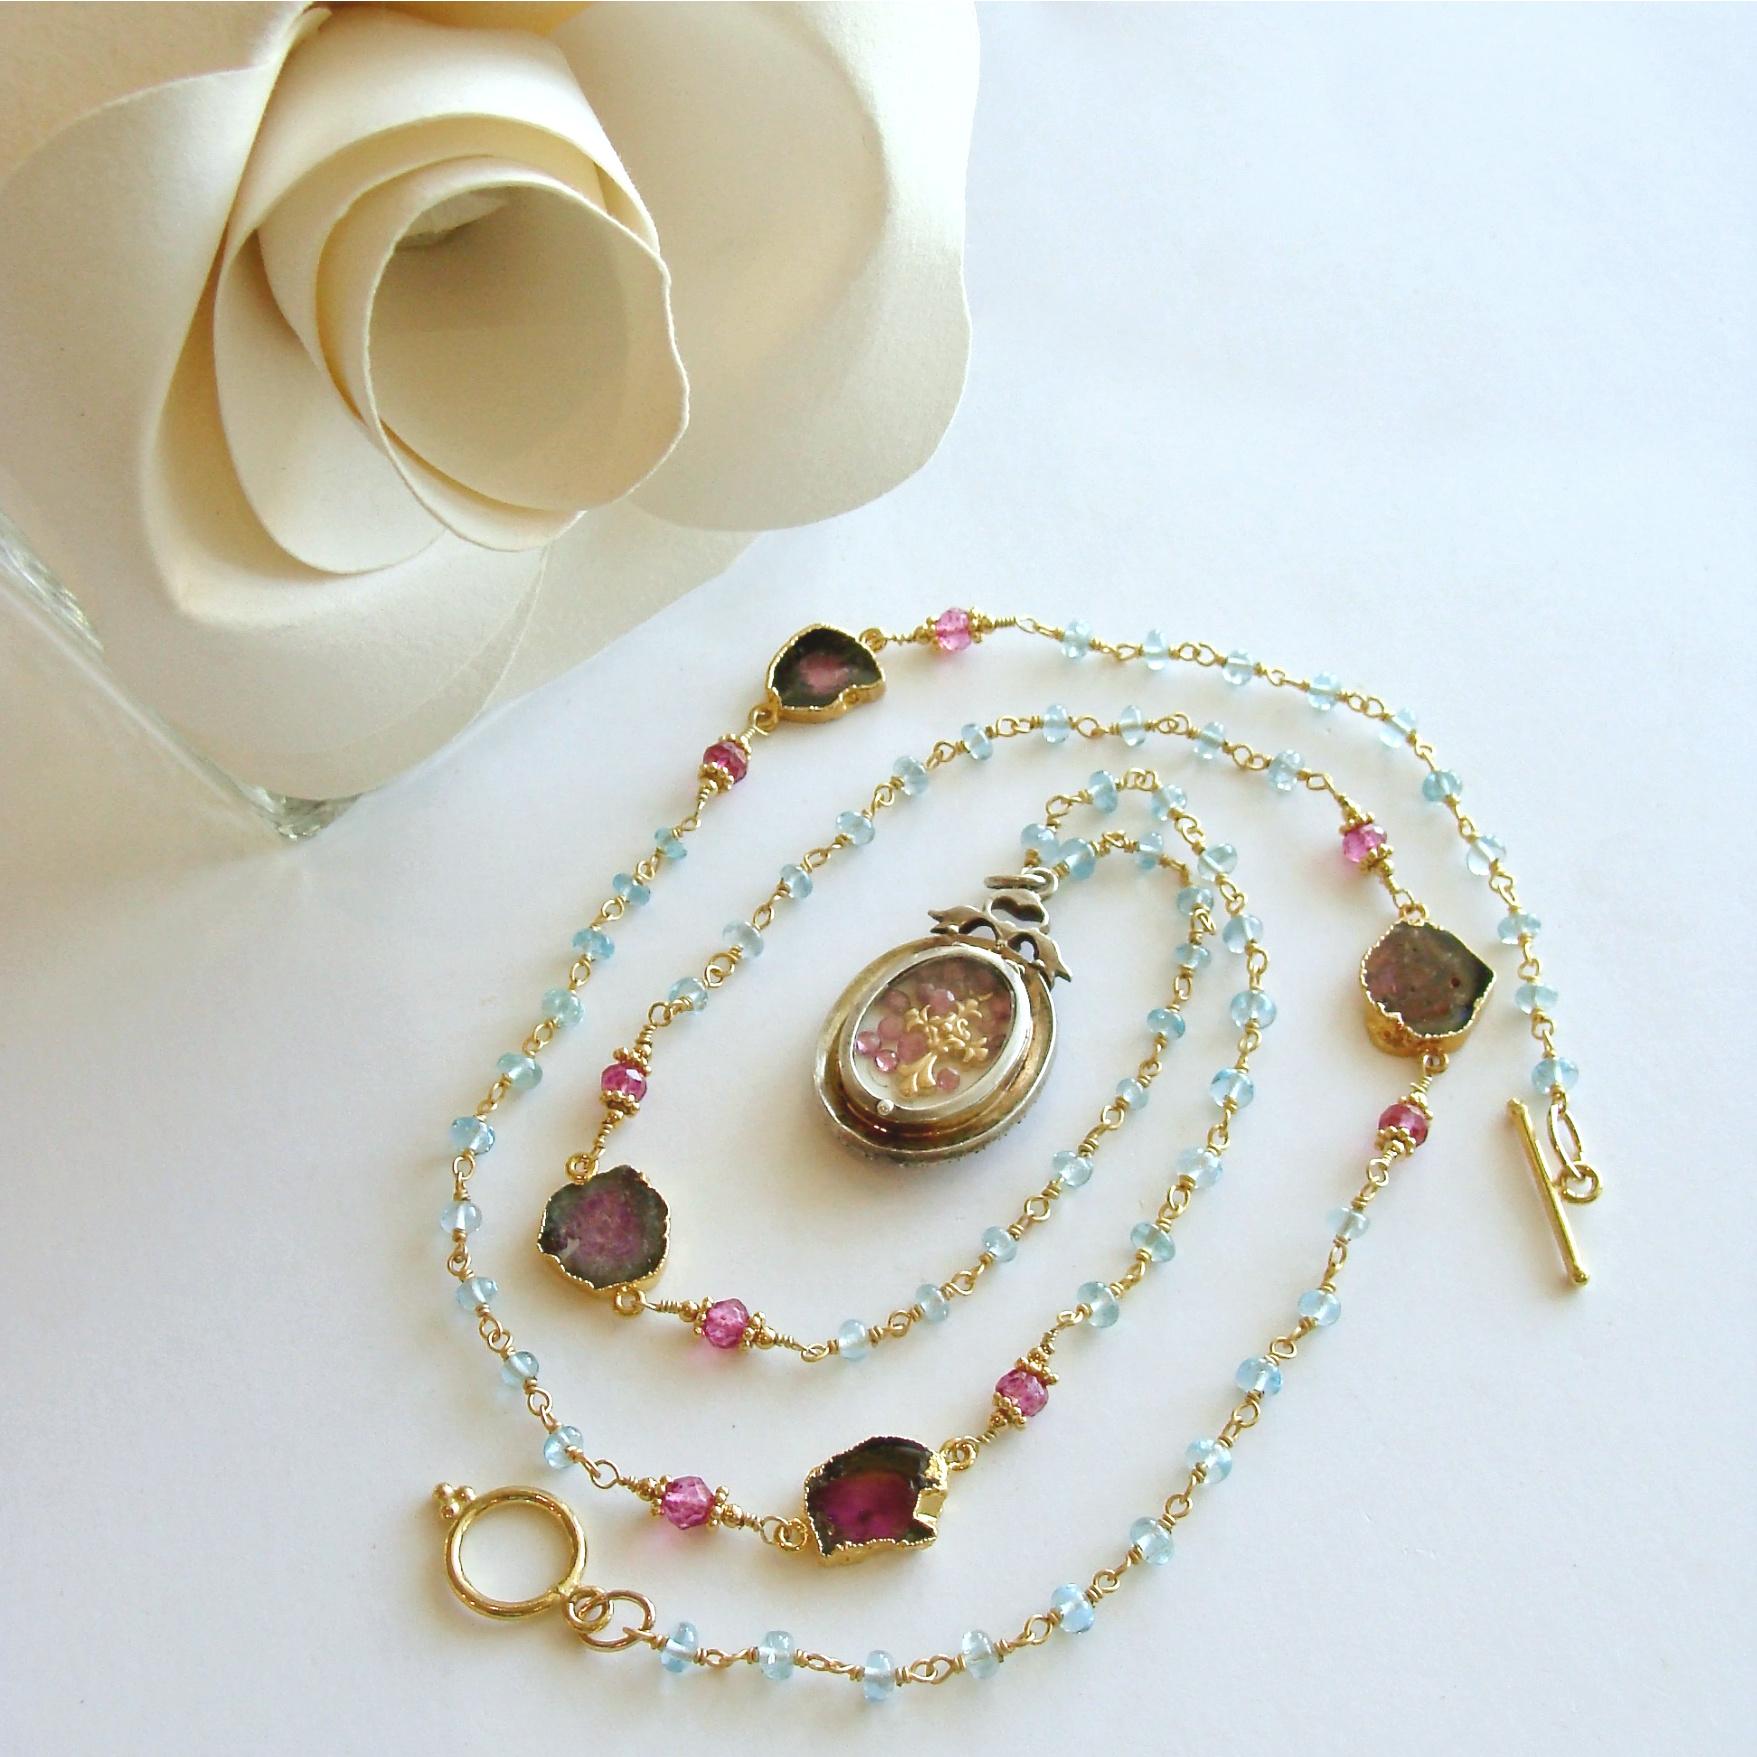 Bead Lovers Eye Blue Topaz and Watermelon Tourmaline Necklace, Isabella II Necklace